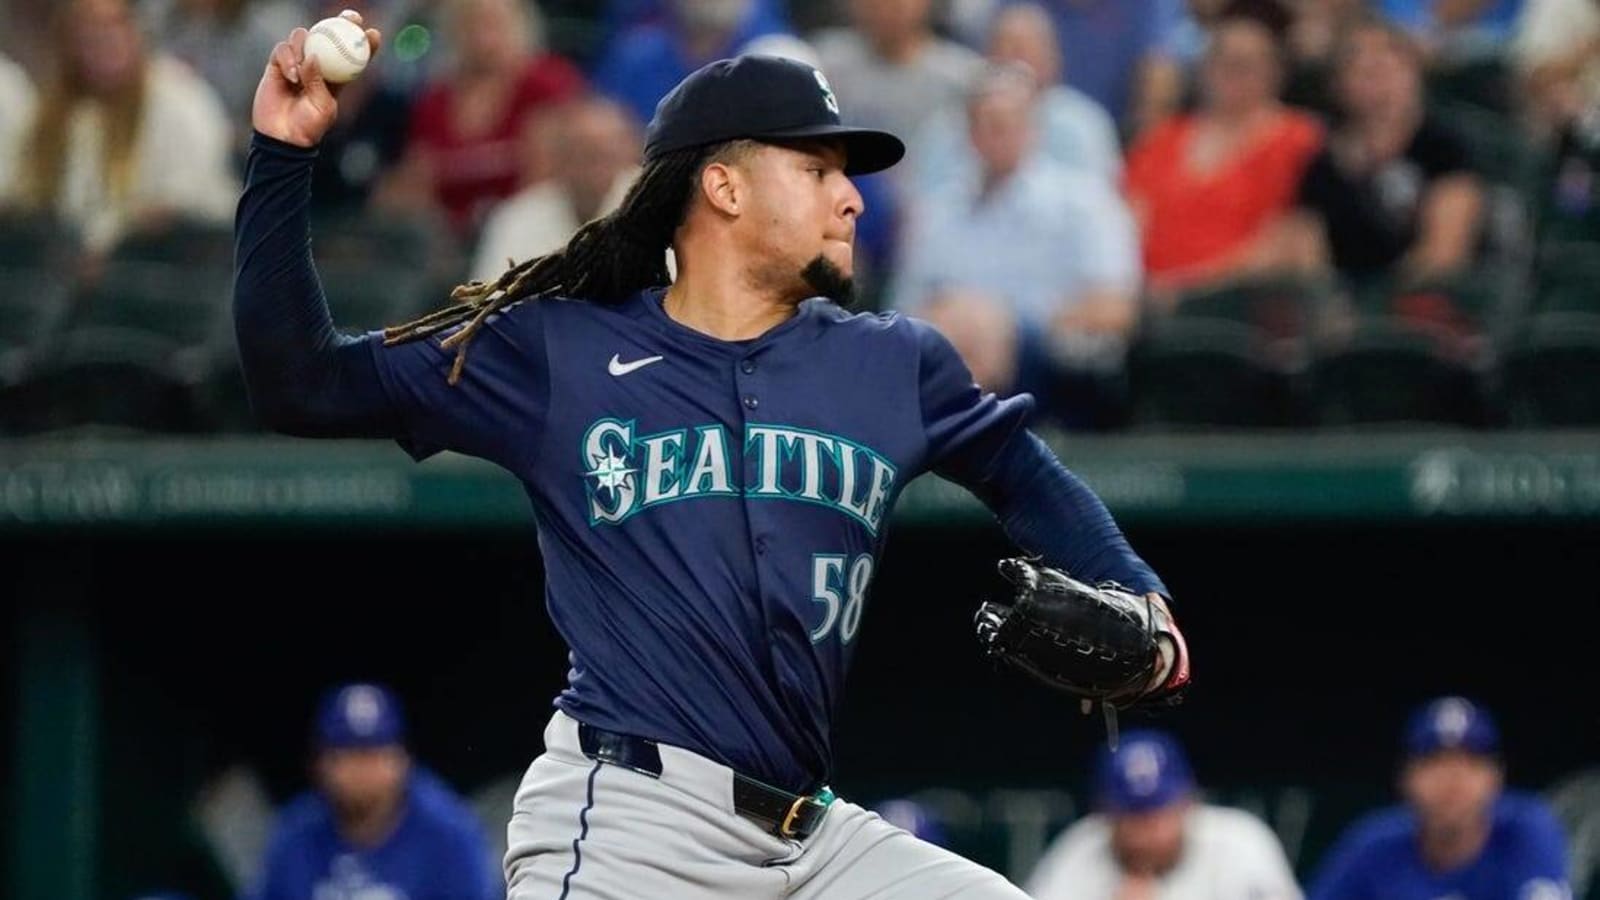 Mariners fend off Rangers to grab first place in AL West